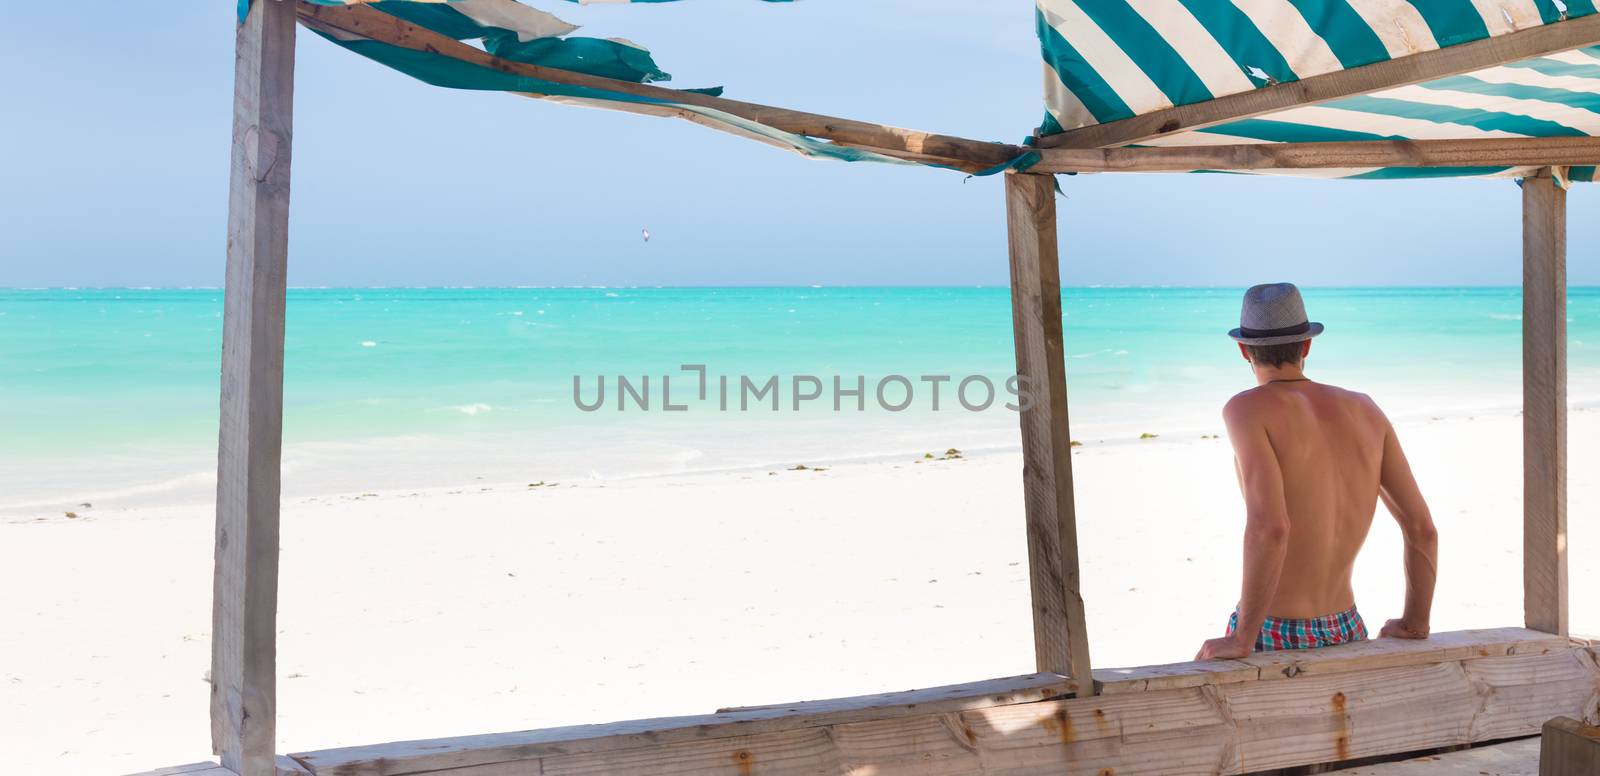 Man hiding in shade from burning tropical sun on picture perfect tropical sandy beach. Summer leisure. Shot from back.